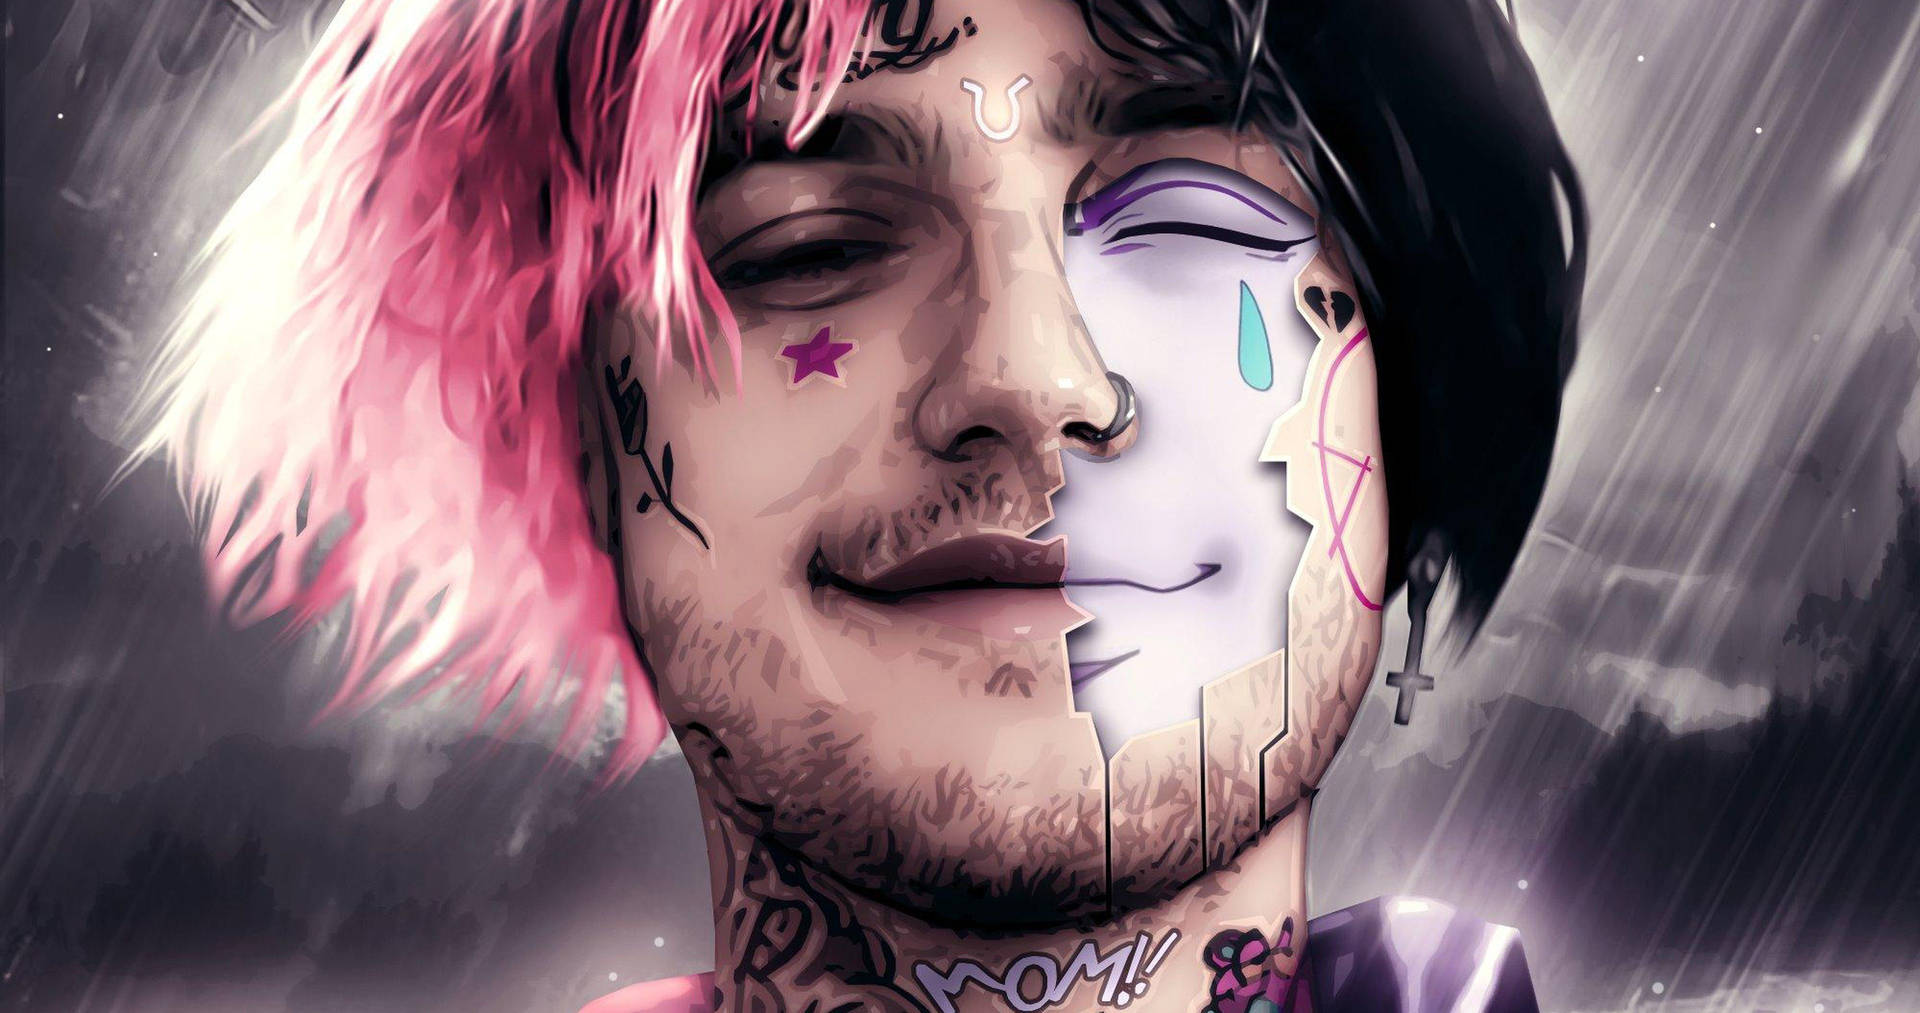 500 Lil Peep Laptop Wallpapers  Background Beautiful Best Available For  Download Lil Peep Laptop Images Free On Zicxacomphotos  Zicxa Photos